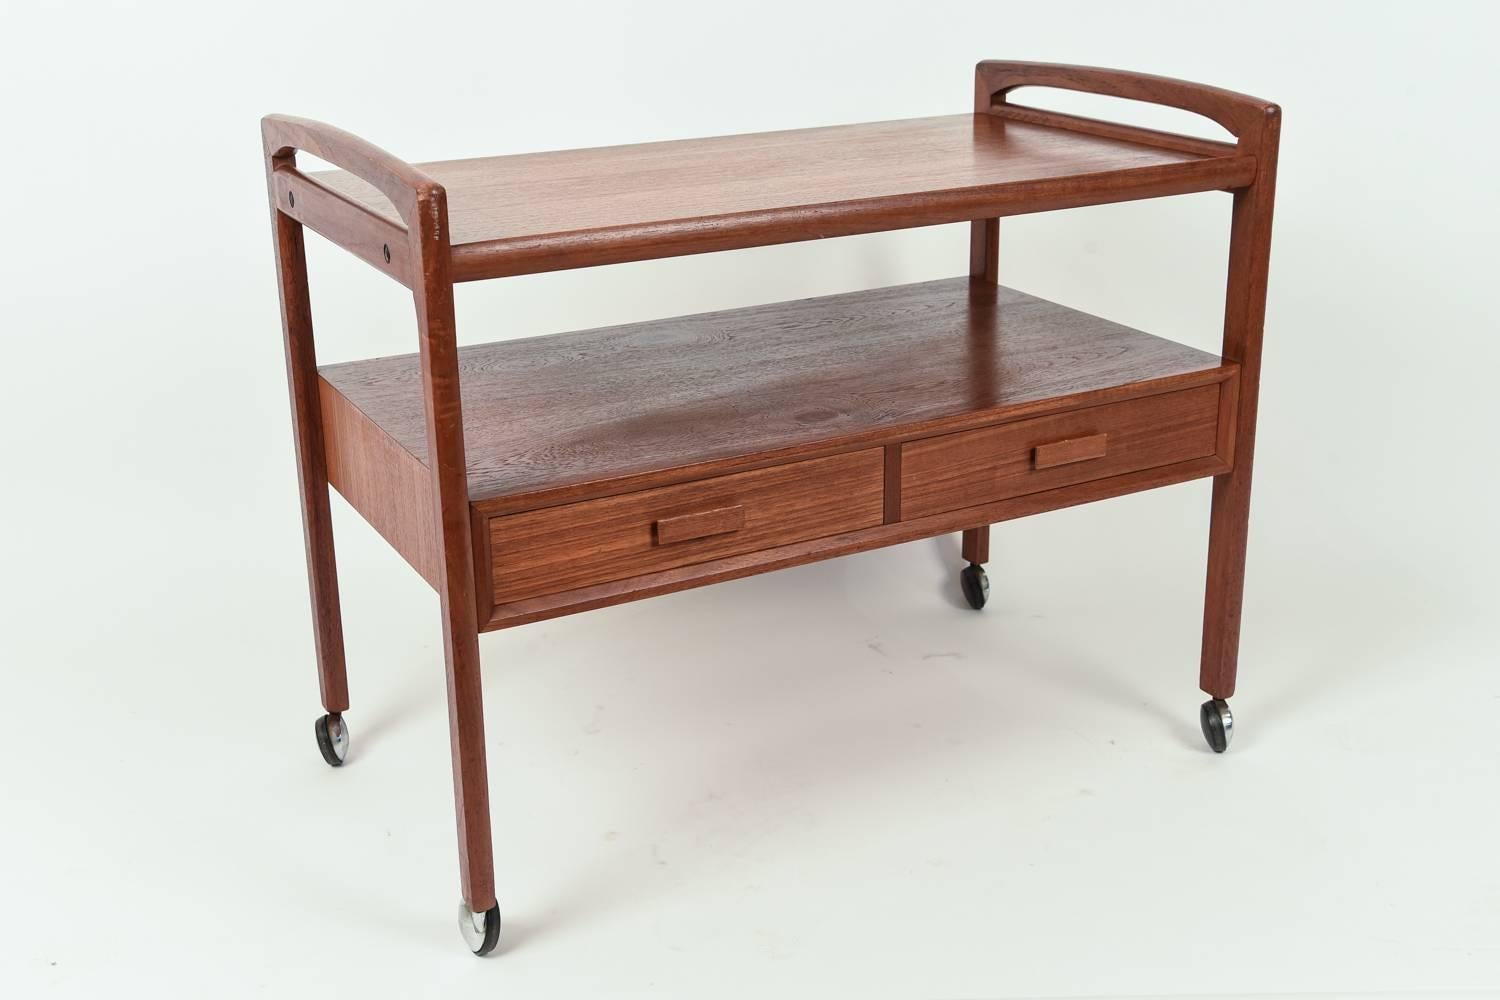 Mid-20th Century Danish Mid-Century Teak Serving Trolley or Cart by Arrebo Møbler